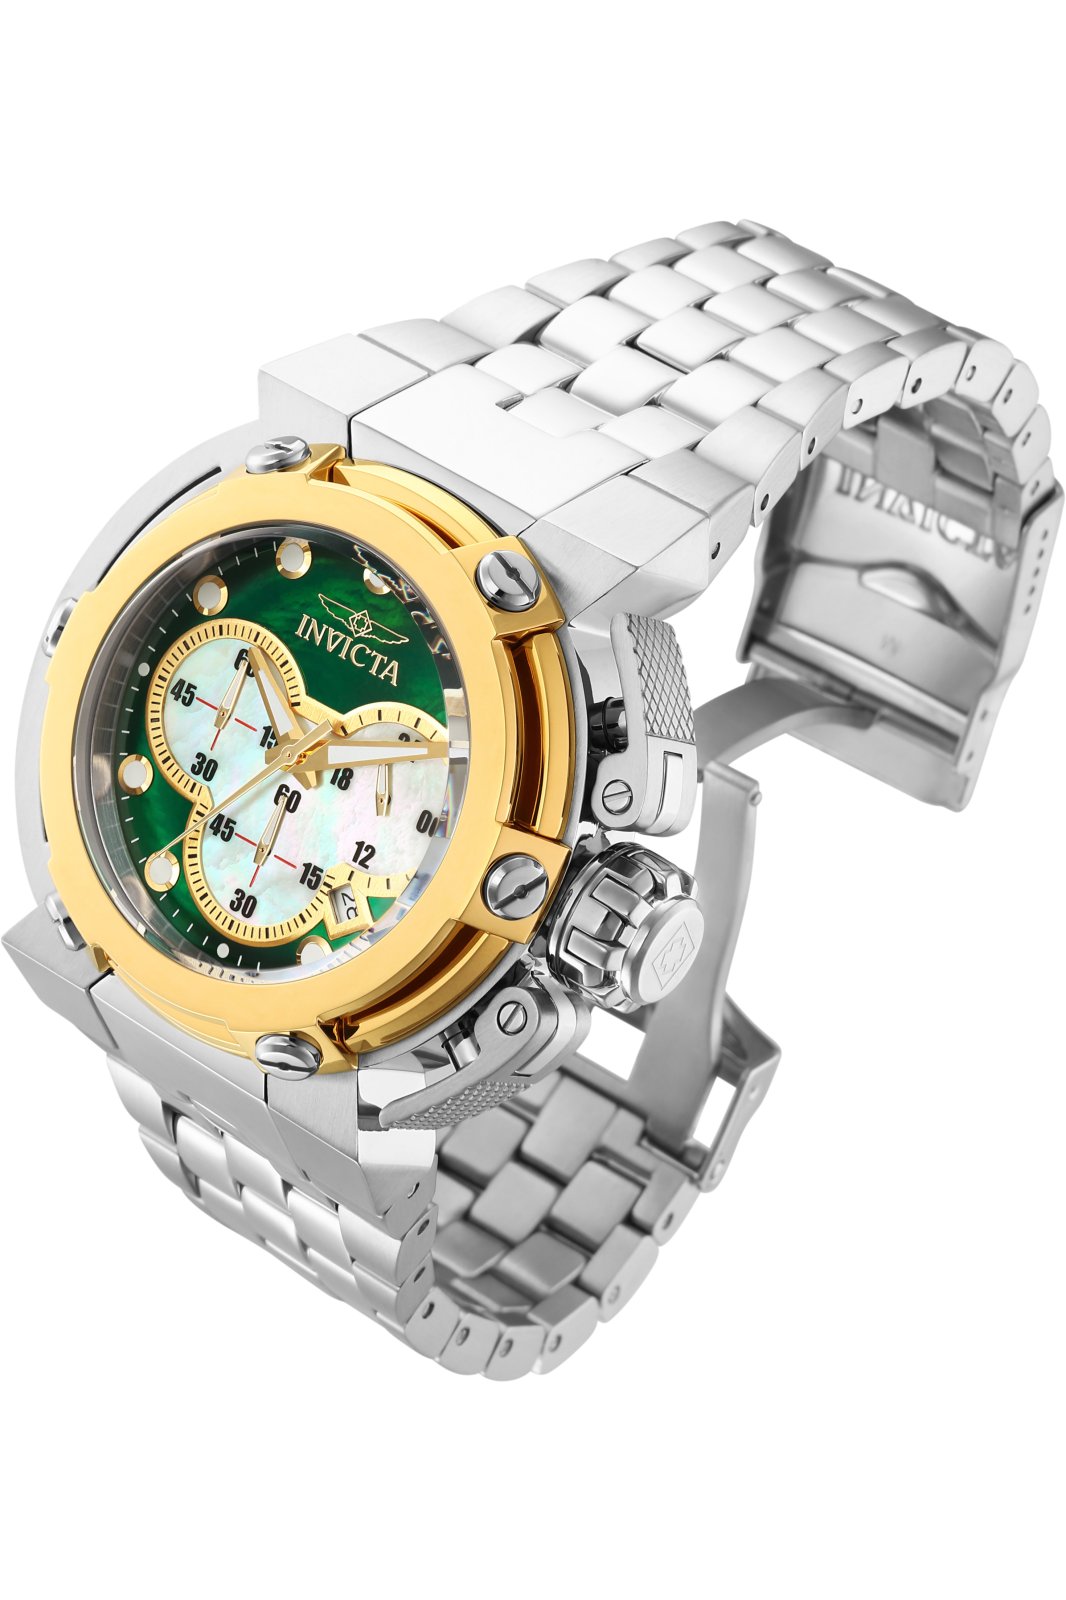 Invicta Watch Coalition Forces - X-Wing 30454 - Official Invicta